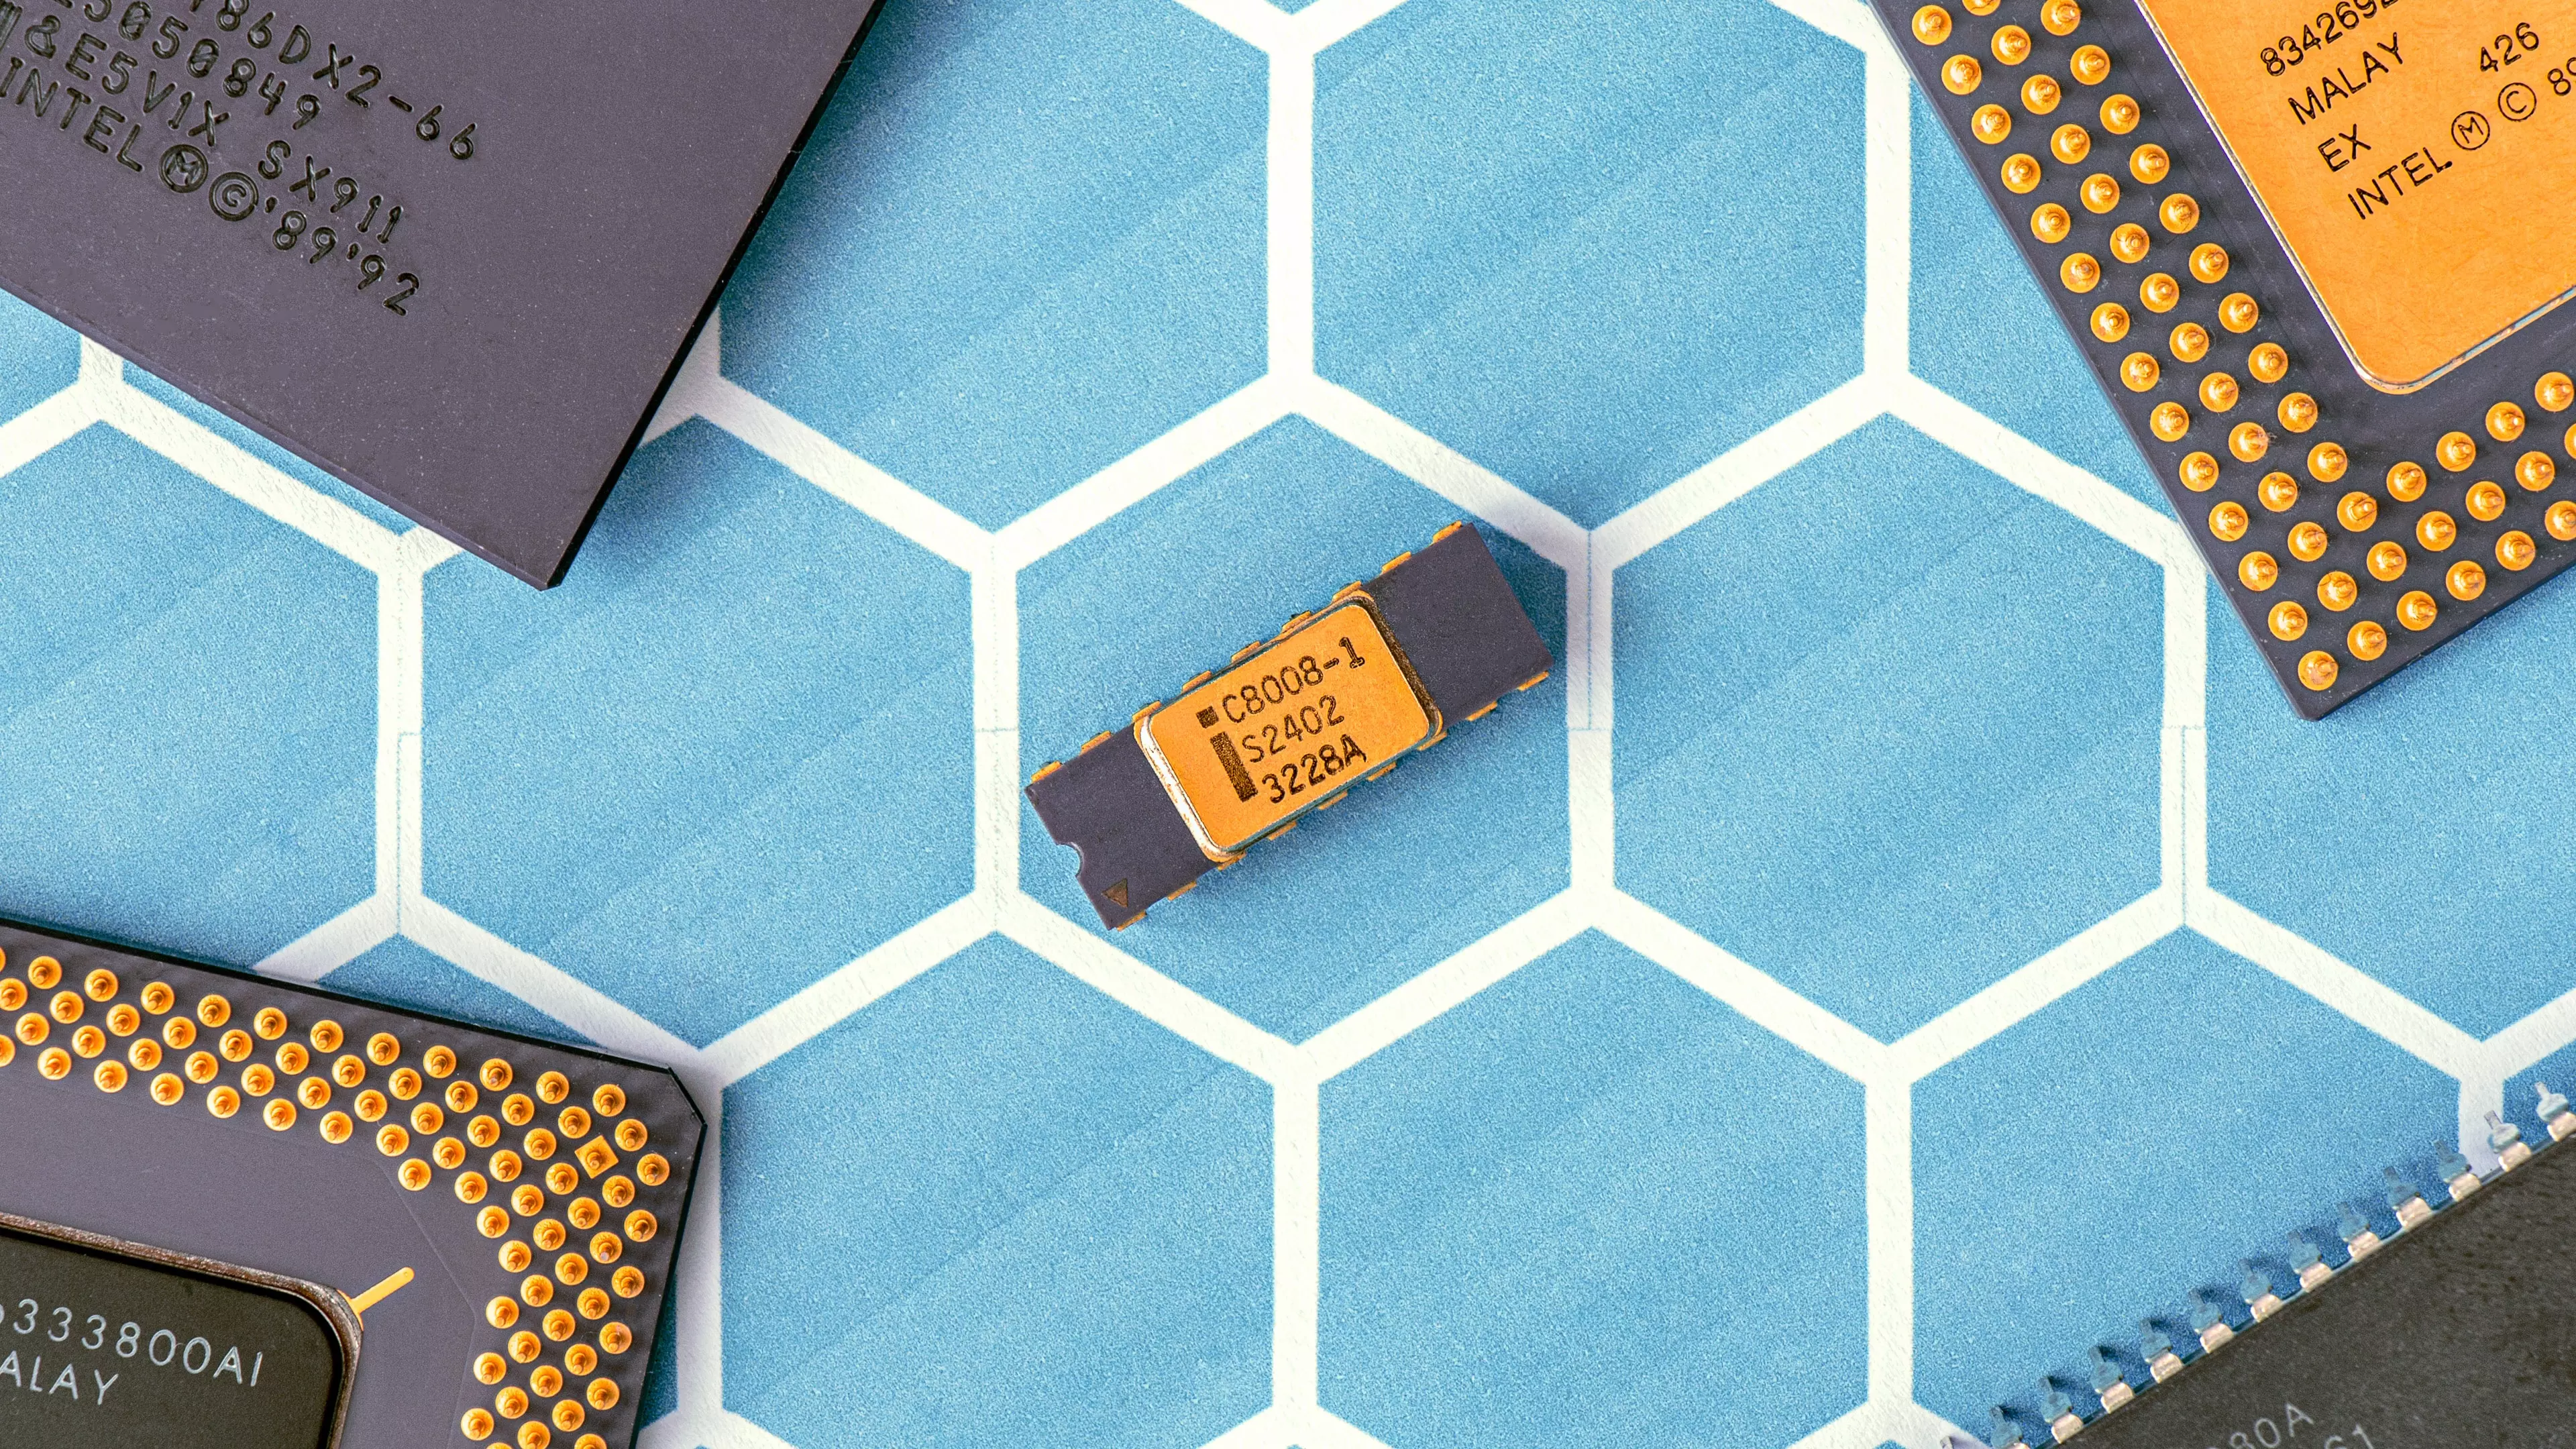 How Are Semiconductors Changing the World?